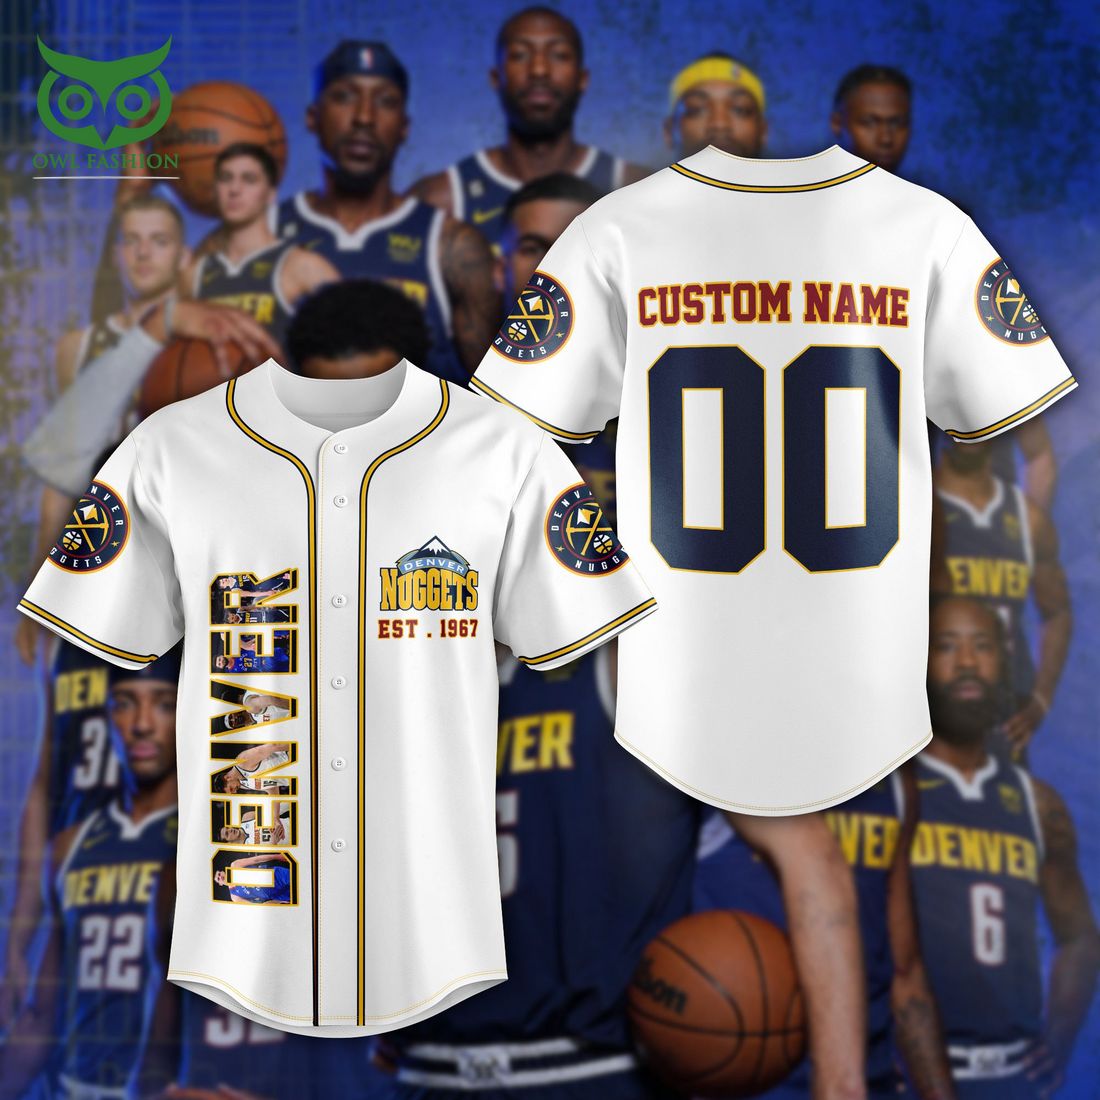 2023 NBA Champions Bring It In Denver Nuggets Personalized Navy Design  Baseball Jersey - Growkoc